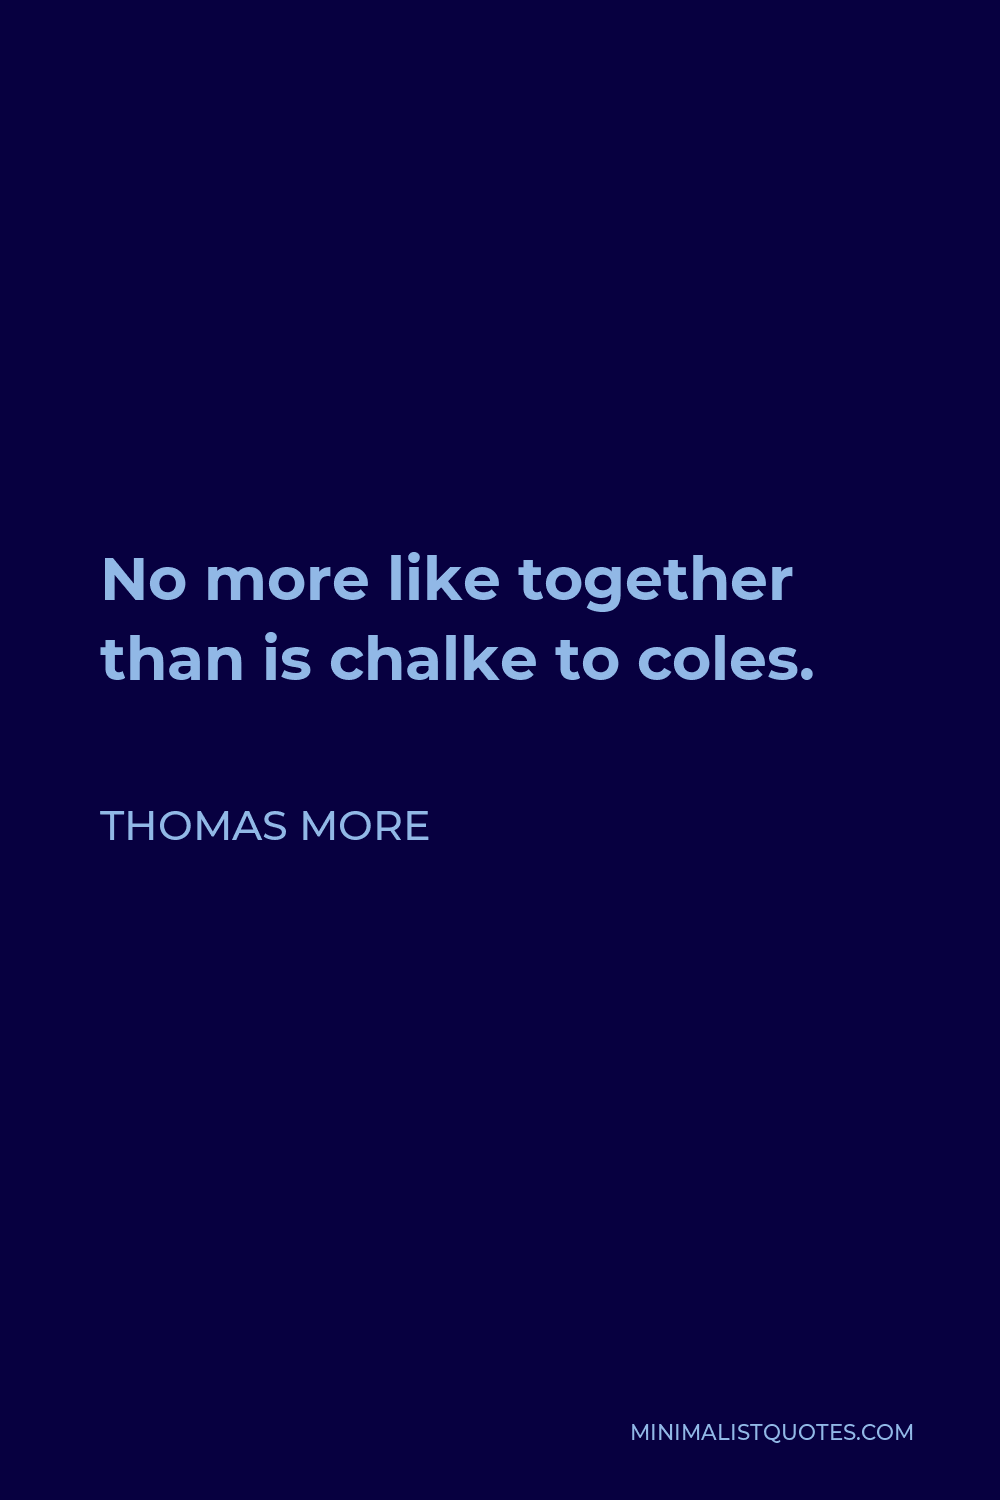 Thomas More Quote - No more like together than is chalke to coles.